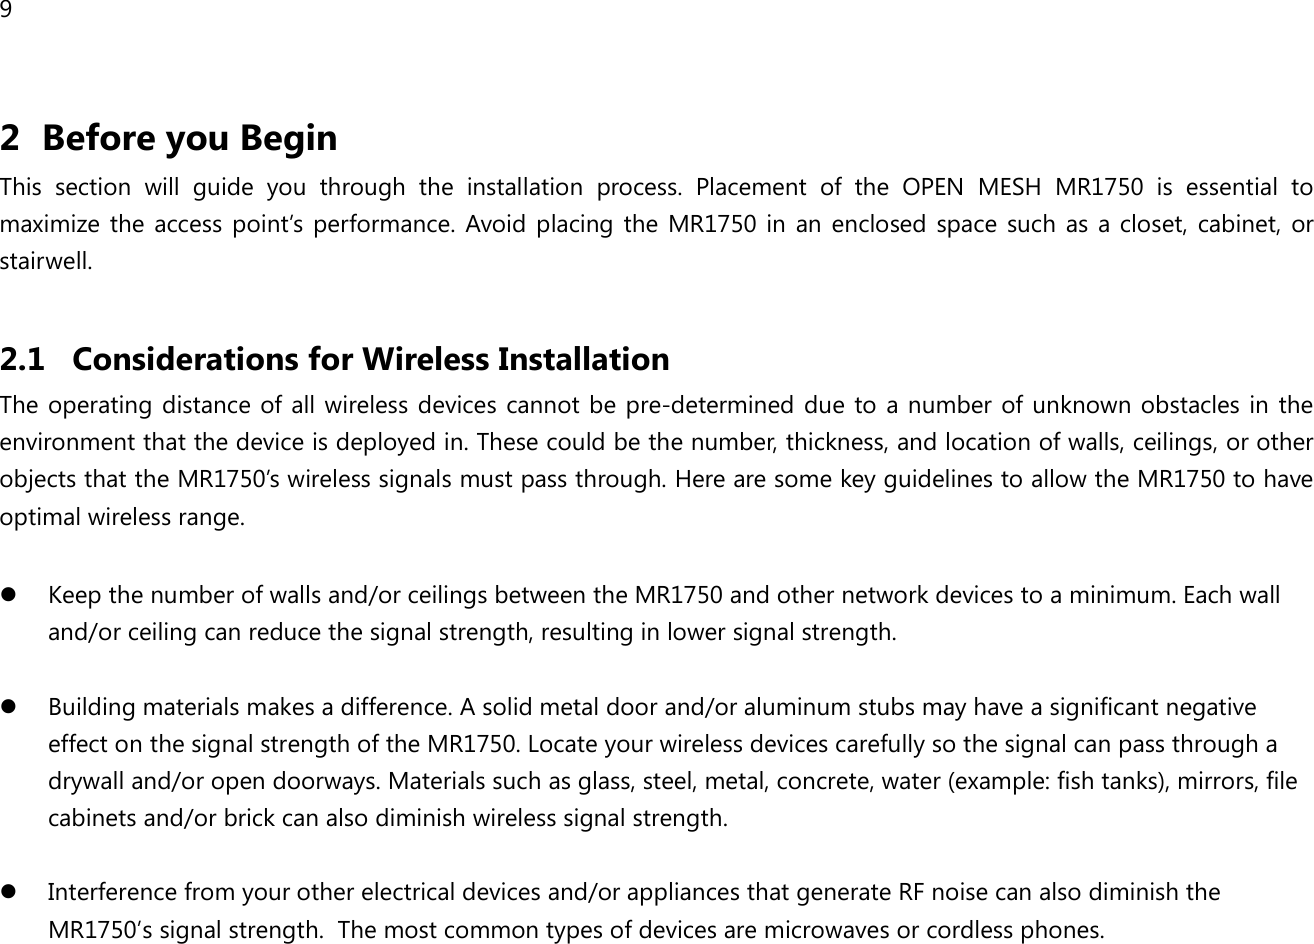 9  2 Before you Begin This  section  will  guide  you  through  the  installation  process.  Placement  of  the  OPEN  MESH  MR1750  is  essential  to maximize the access  point’s  performance.  Avoid placing the MR1750  in  an  enclosed space such as  a closet,  cabinet,  or stairwell.  2.1 Considerations for Wireless Installation The operating  distance of all wireless devices cannot  be pre-determined due to  a number of unknown obstacles in the environment that the device is deployed in. These could be the number, thickness, and location of walls, ceilings, or other objects that the MR1750’s wireless signals must pass through. Here are some key guidelines to allow the MR1750 to have optimal wireless range.   Keep the number of walls and/or ceilings between the MR1750 and other network devices to a minimum. Each wall and/or ceiling can reduce the signal strength, resulting in lower signal strength.   Building materials makes a difference. A solid metal door and/or aluminum stubs may have a significant negative effect on the signal strength of the MR1750. Locate your wireless devices carefully so the signal can pass through a drywall and/or open doorways. Materials such as glass, steel, metal, concrete, water (example: fish tanks), mirrors, file cabinets and/or brick can also diminish wireless signal strength.   Interference from your other electrical devices and/or appliances that generate RF noise can also diminish the MR1750’s signal strength.  The most common types of devices are microwaves or cordless phones.  